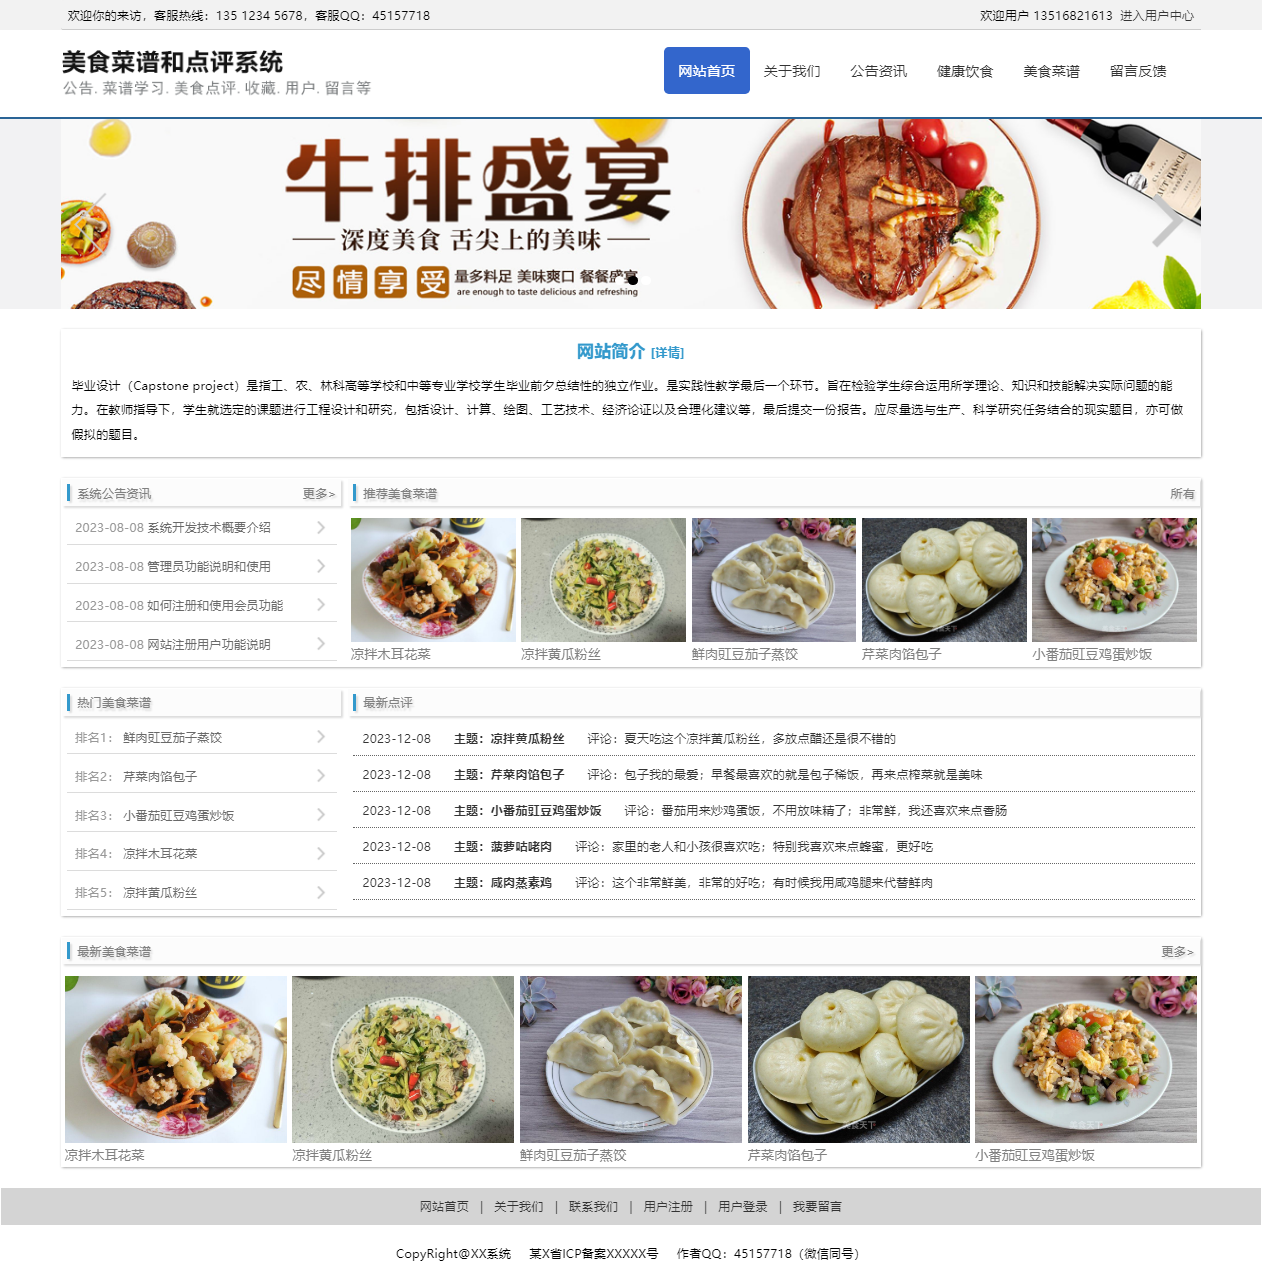 a1-food health and review system website homepage.png